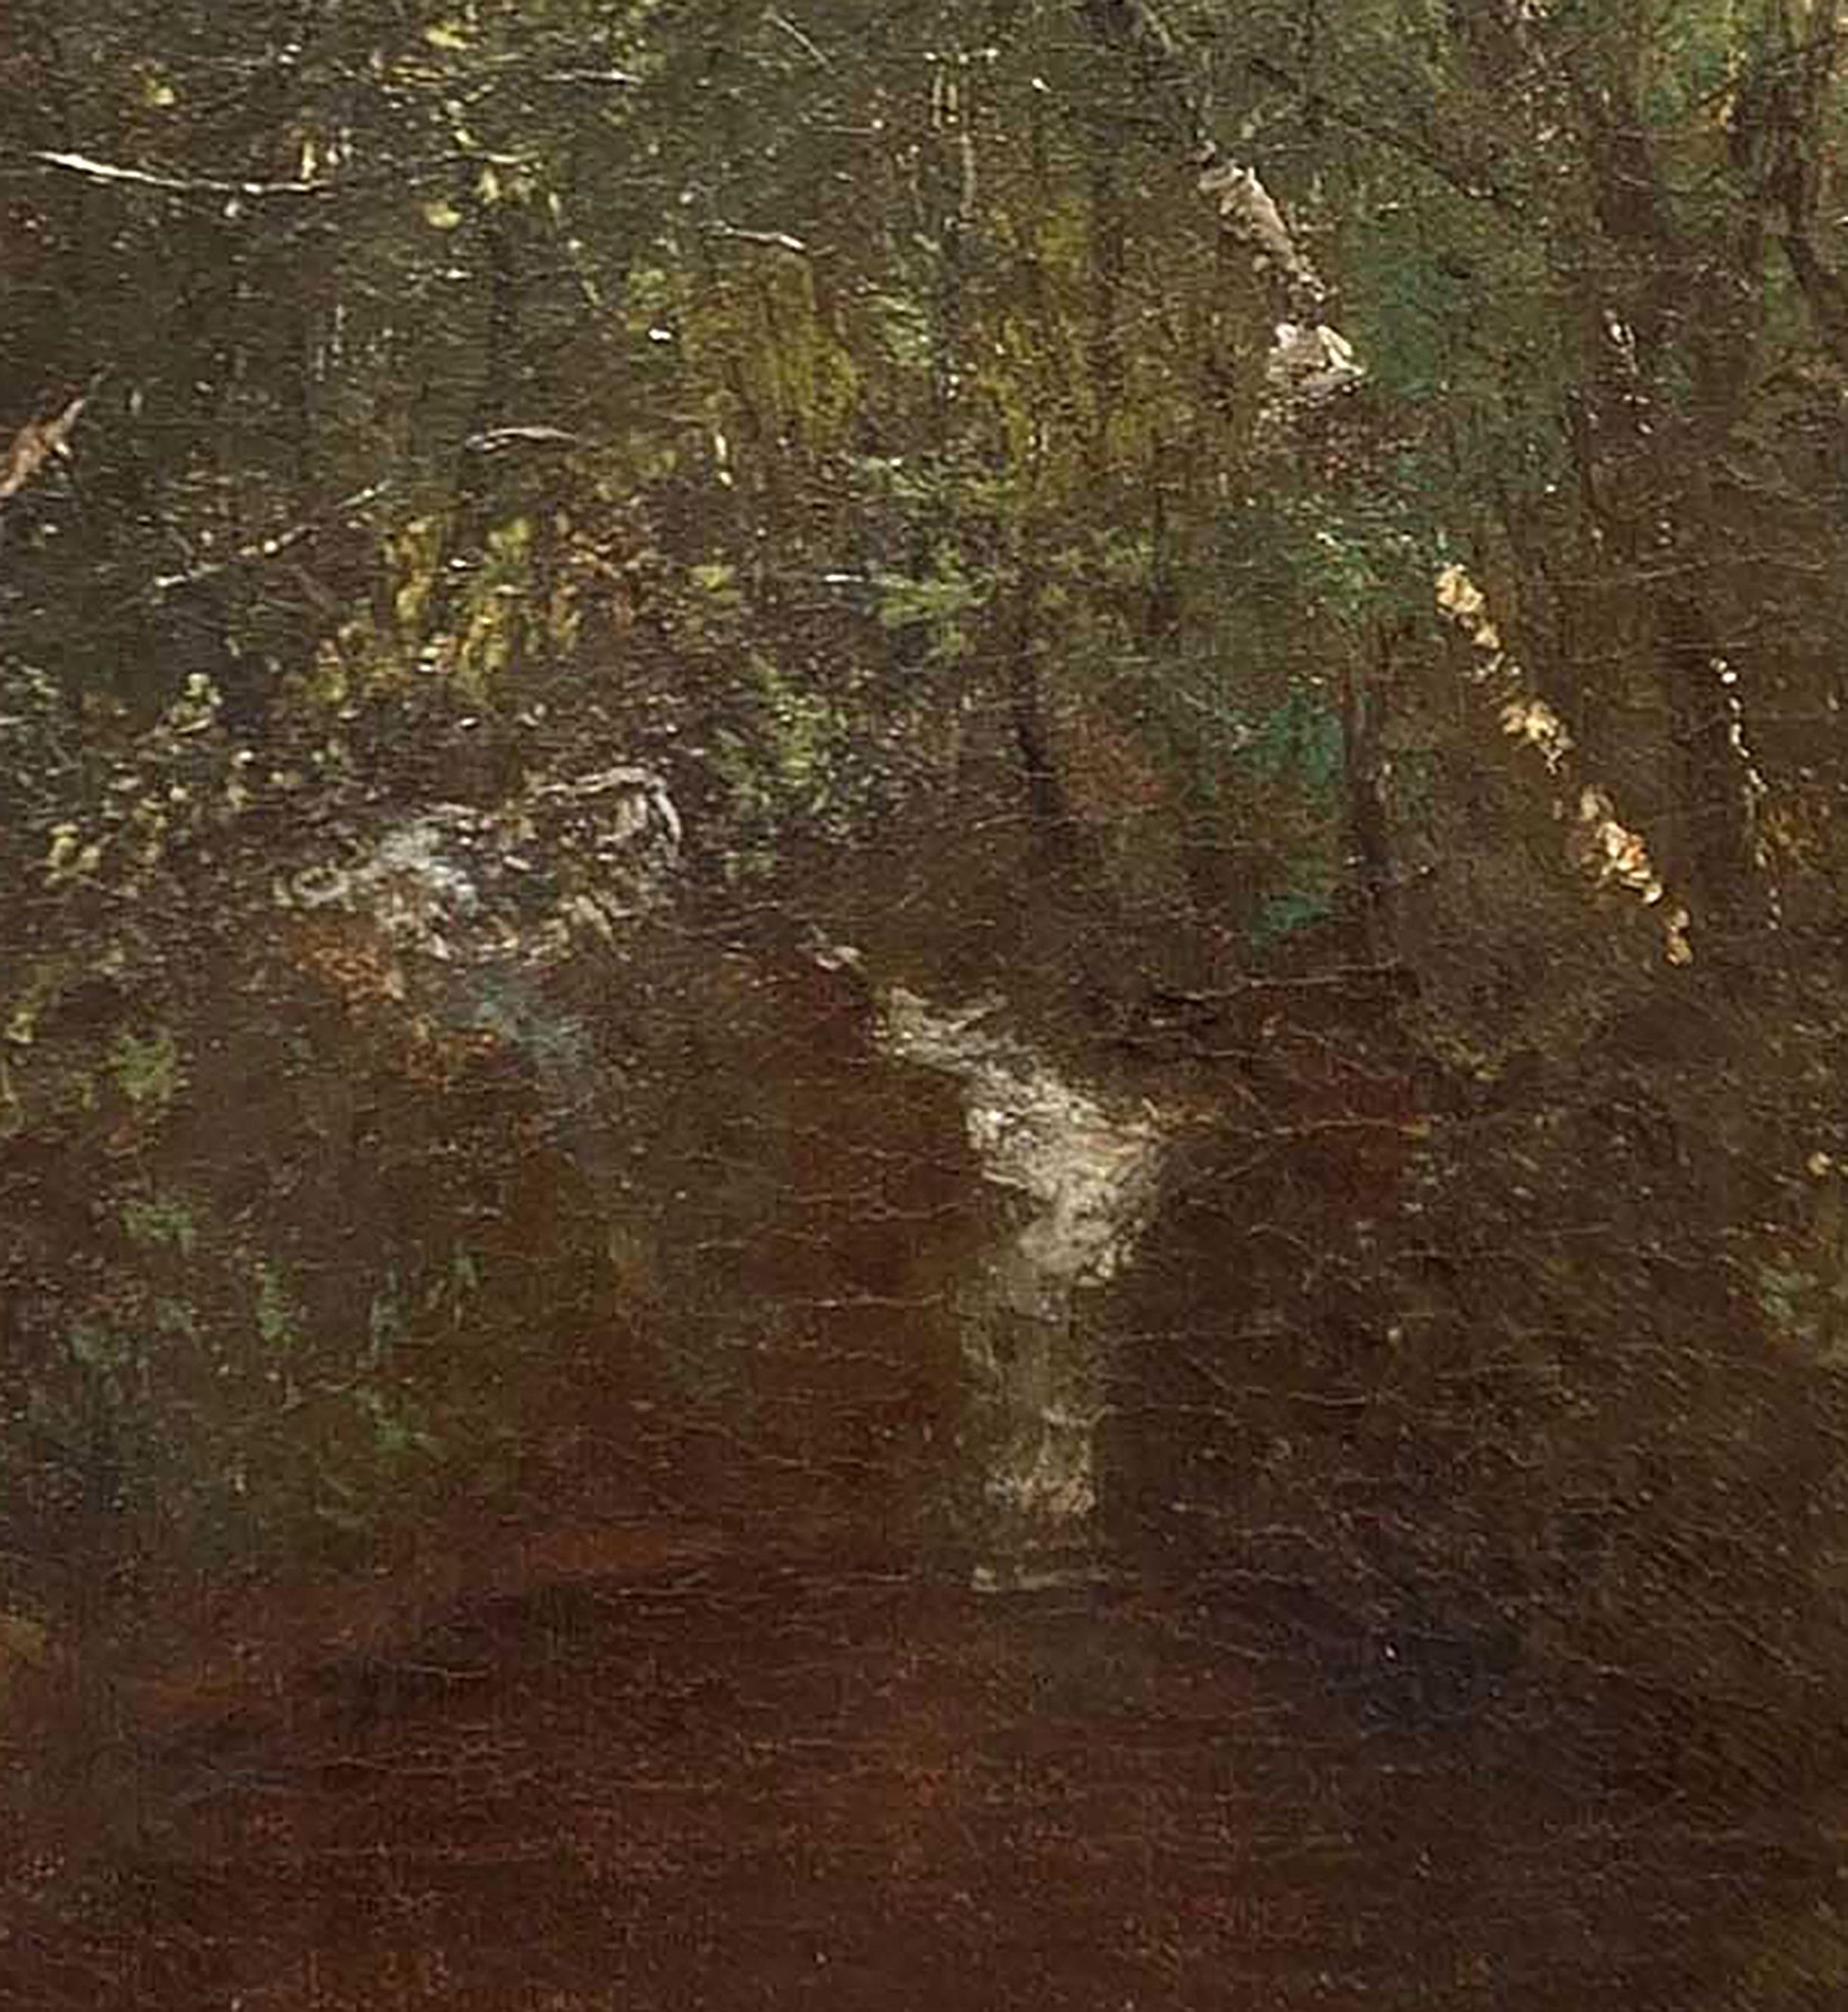 JOHN FREDERICK KENSETT (1816-1872)
Woodland Waterfall
Oil on canvas
14 x 12 inches
Signed lower right


